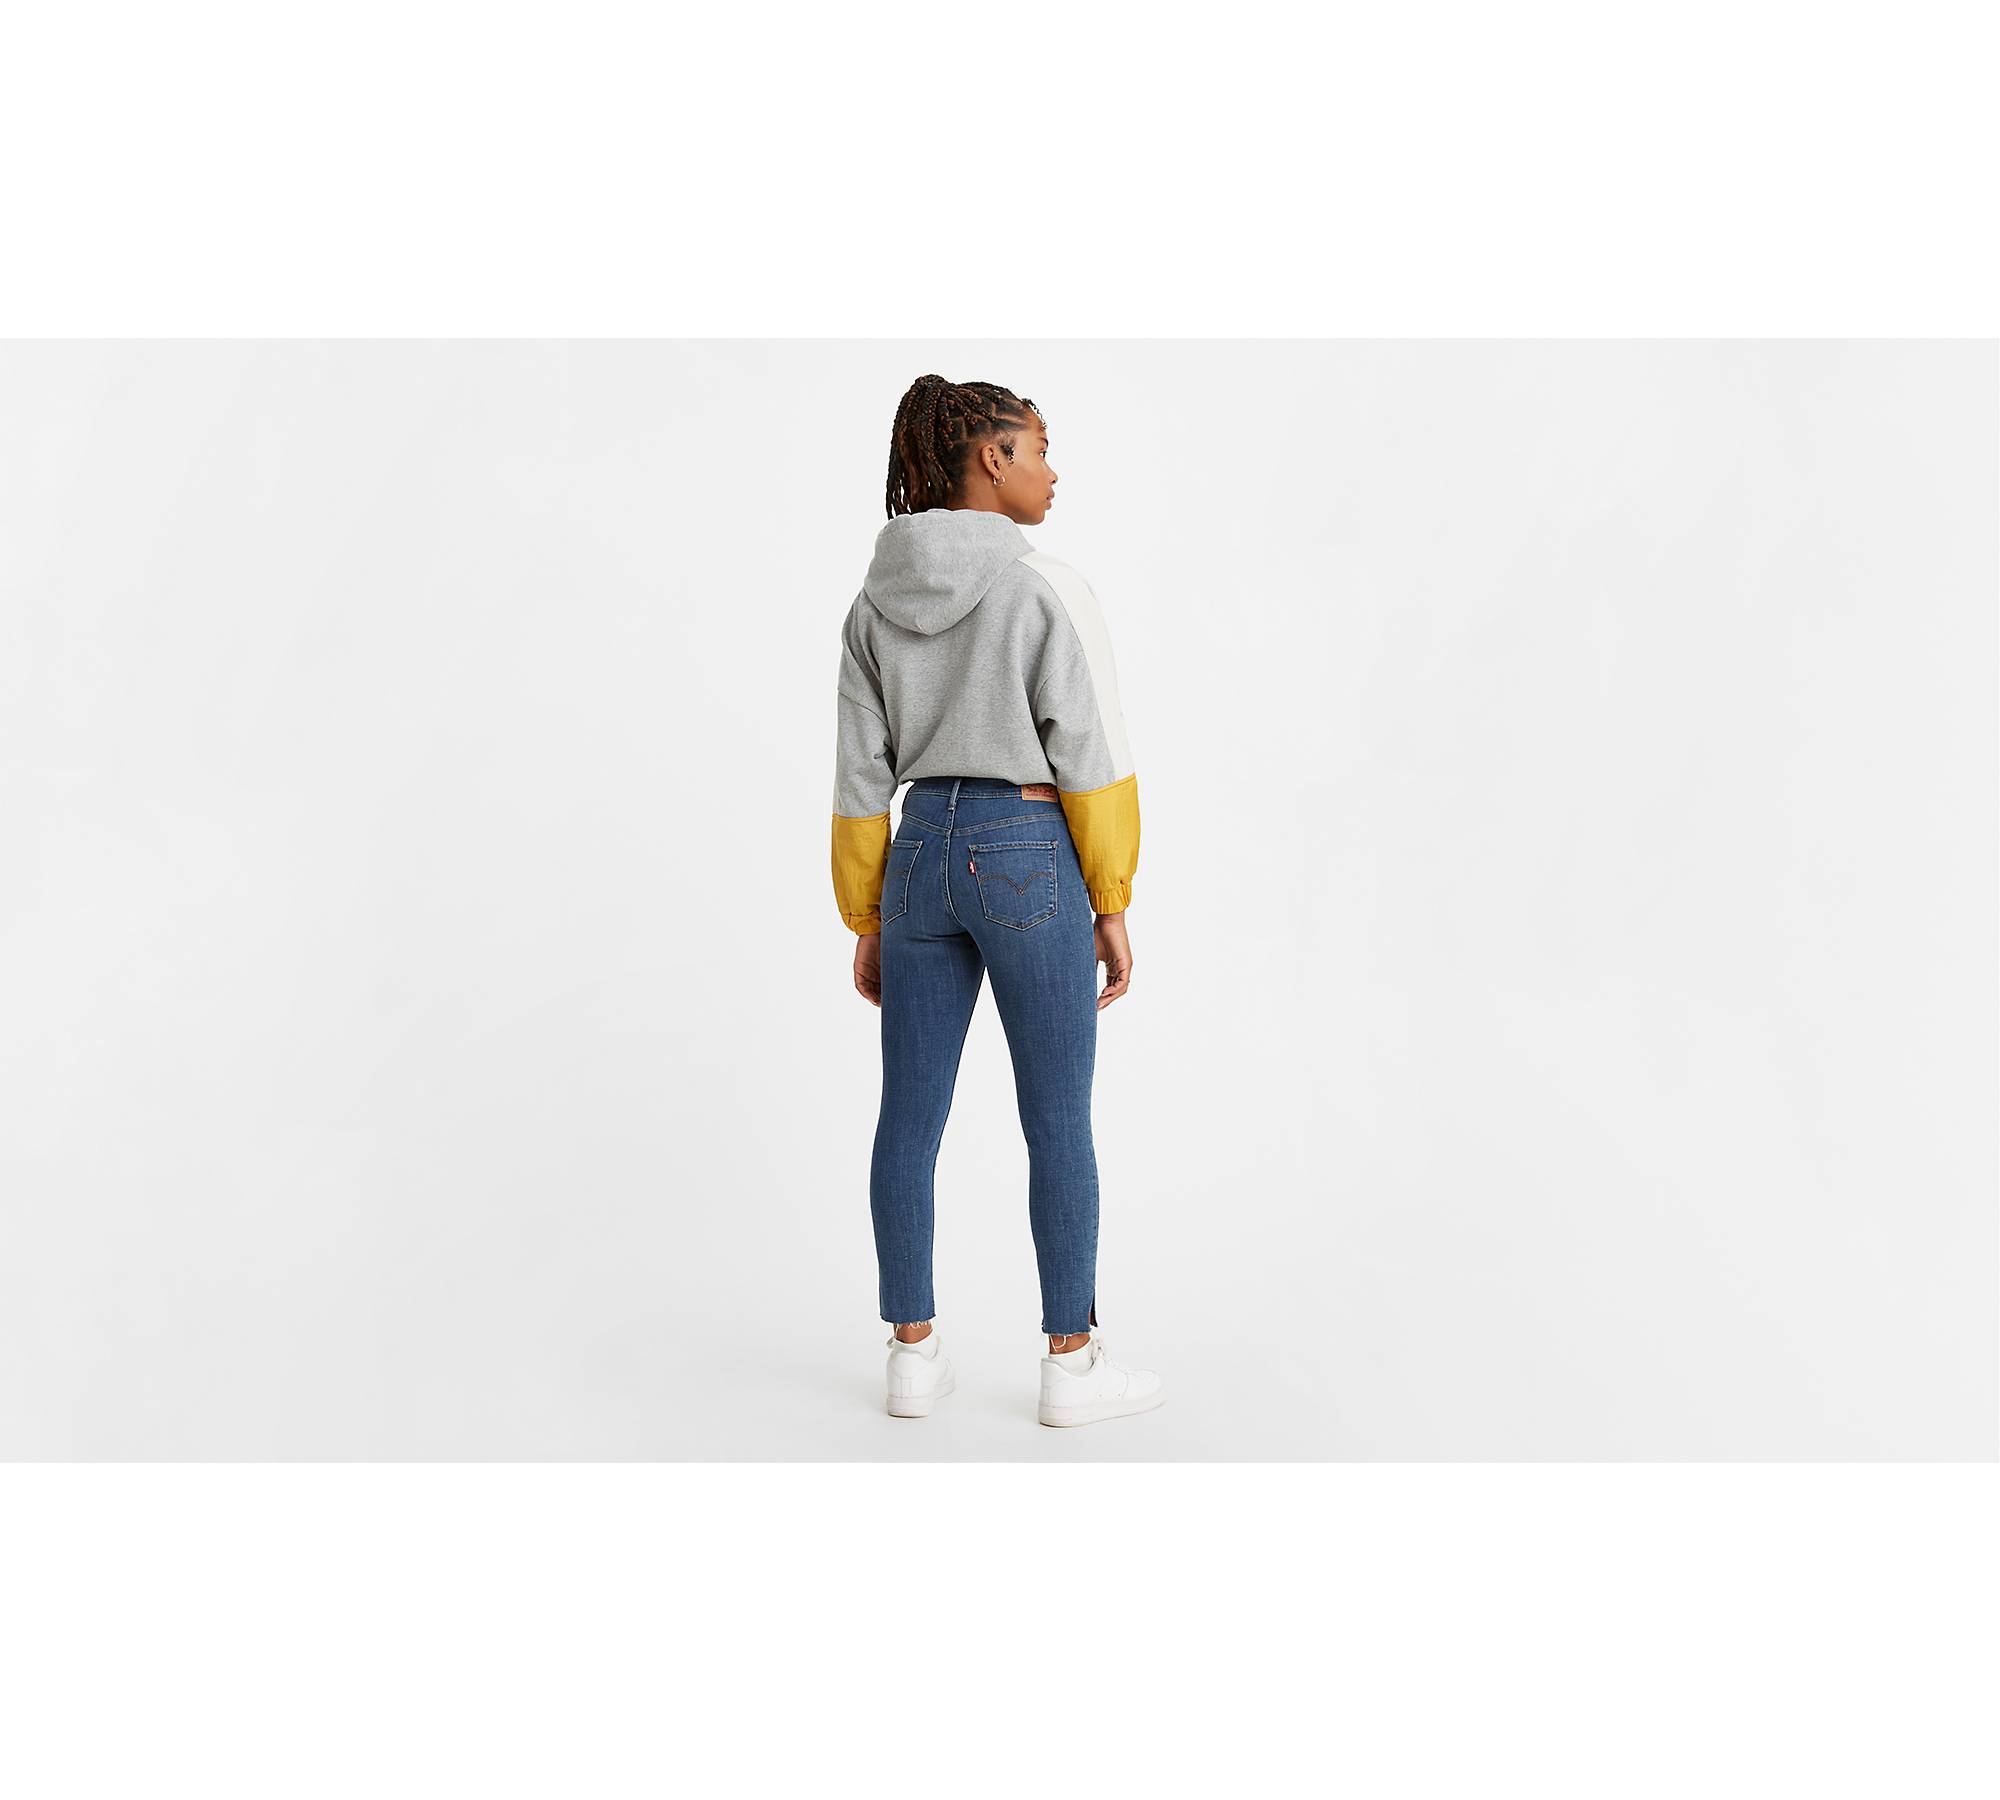 Women's Levi's® 311 Shaping Skinny Jeans with Exposed Buttons